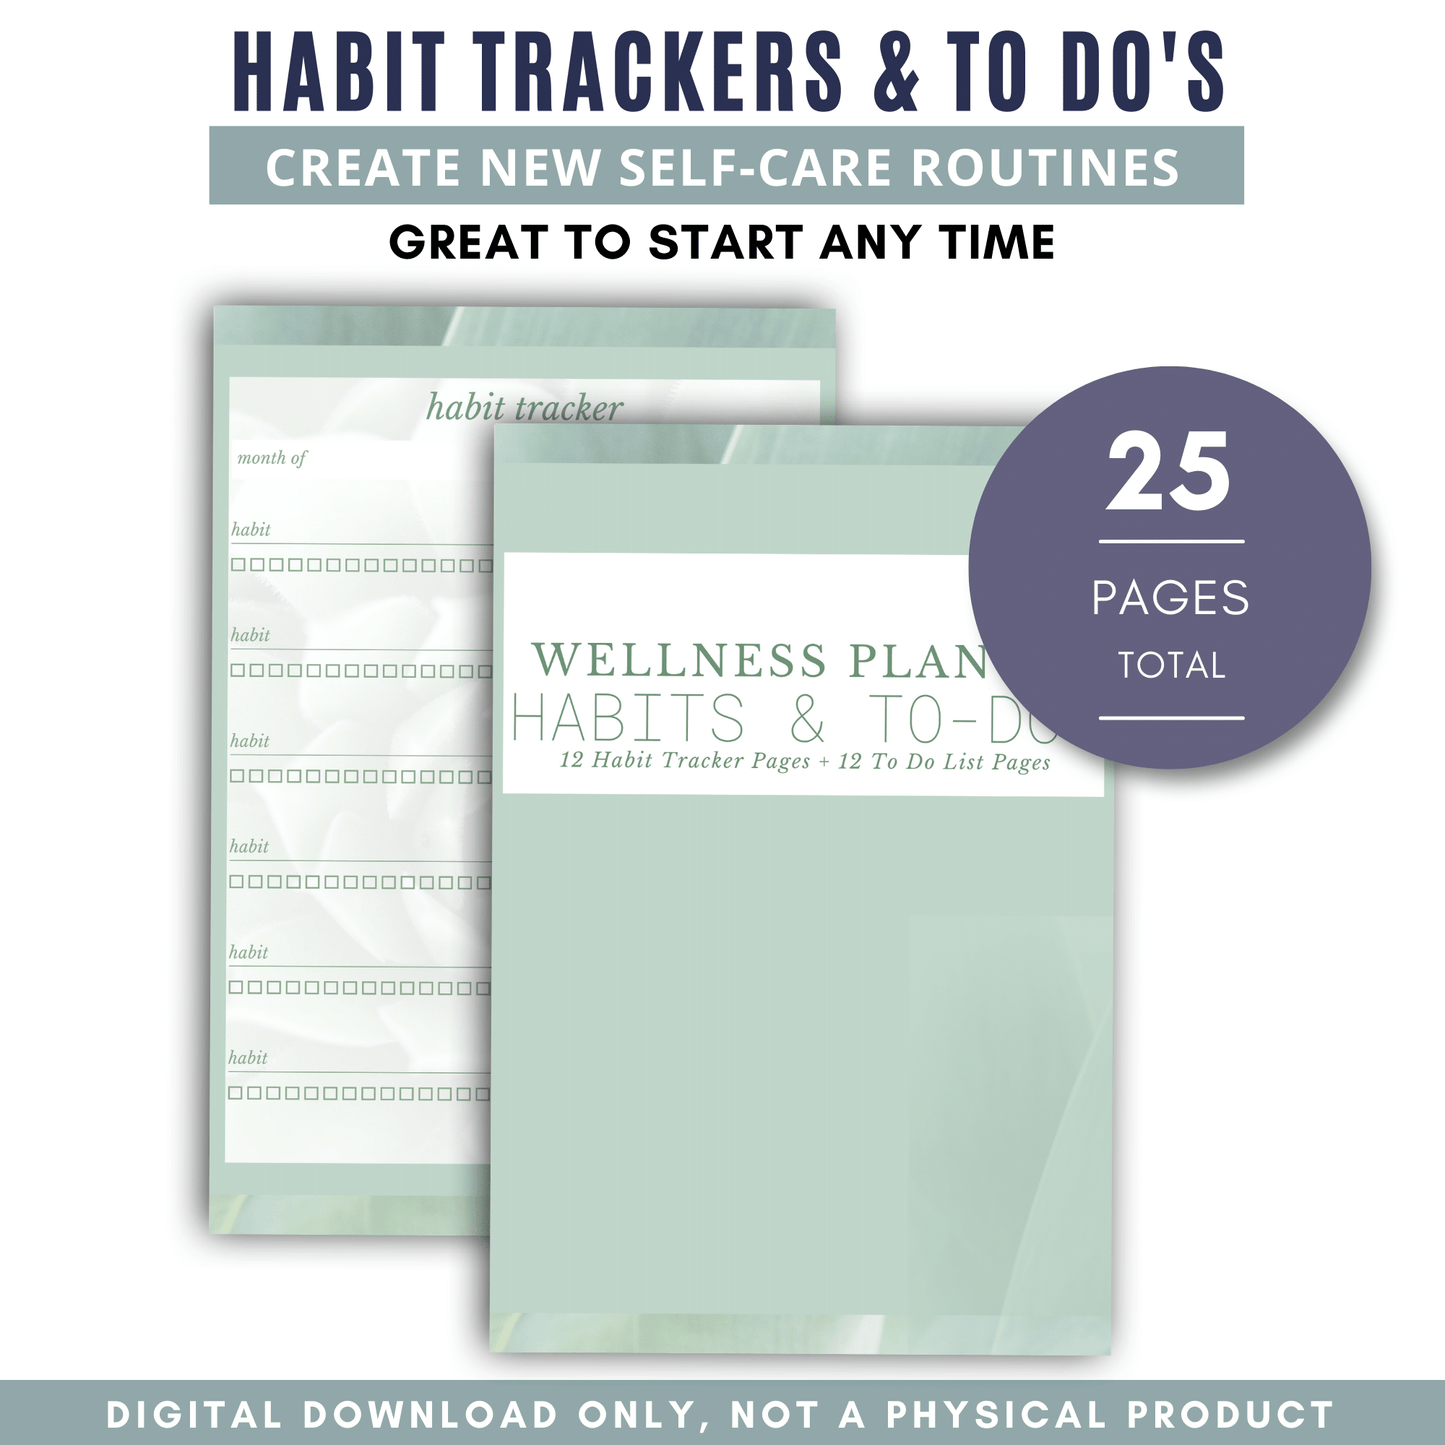 Habit Trackers & To Do's - Wellness Plants - Green Background